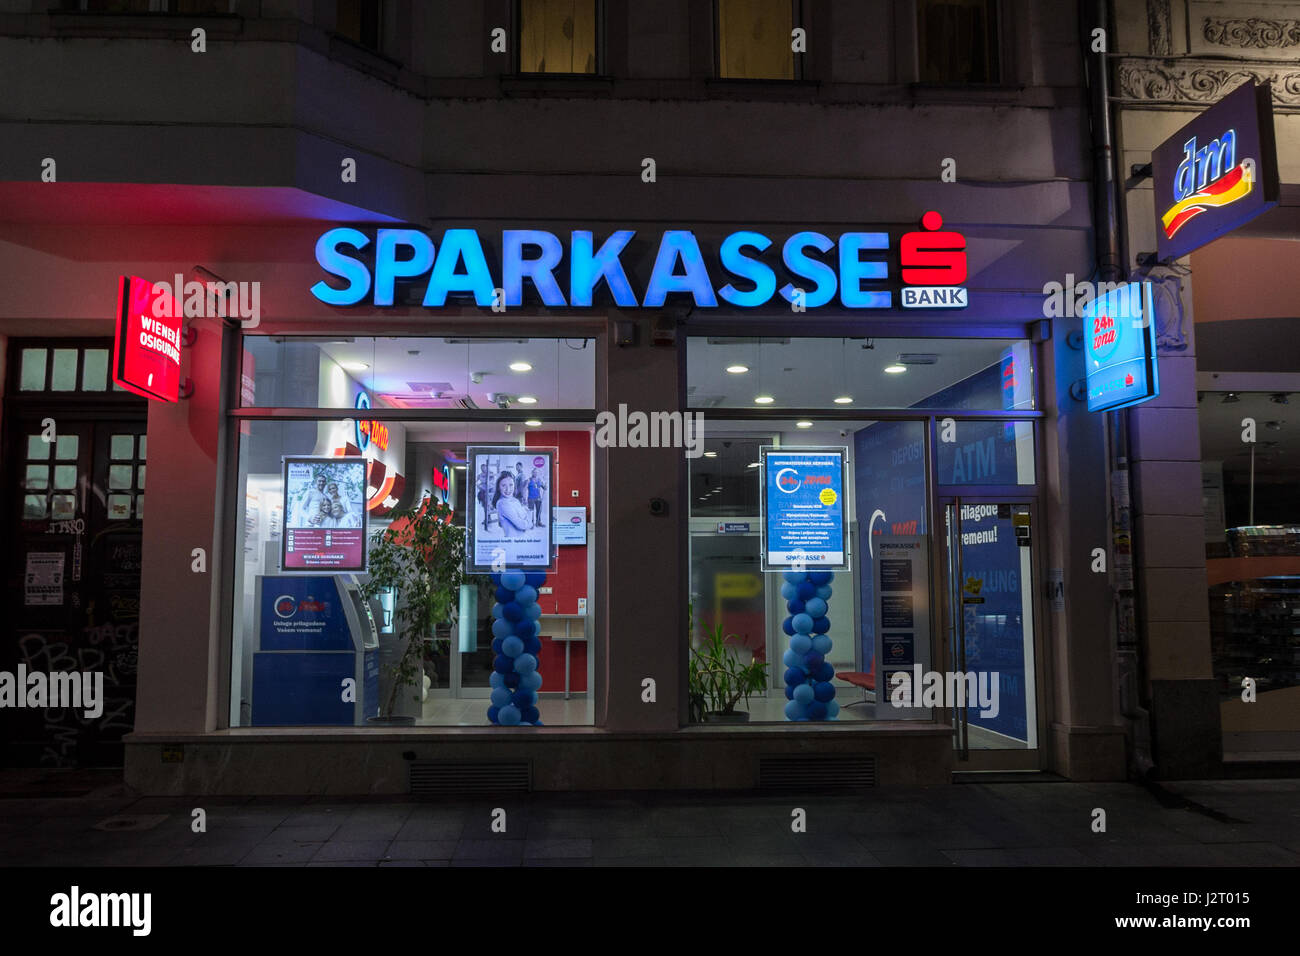 SARAJEVO, BOSNIA AND HERZEGOVINA - APRIL 16, 2017: Office of a Sparkasse bank in Bosnia. Sparkasse is one of the main banks in Balkans, part of the Au Stock Photo